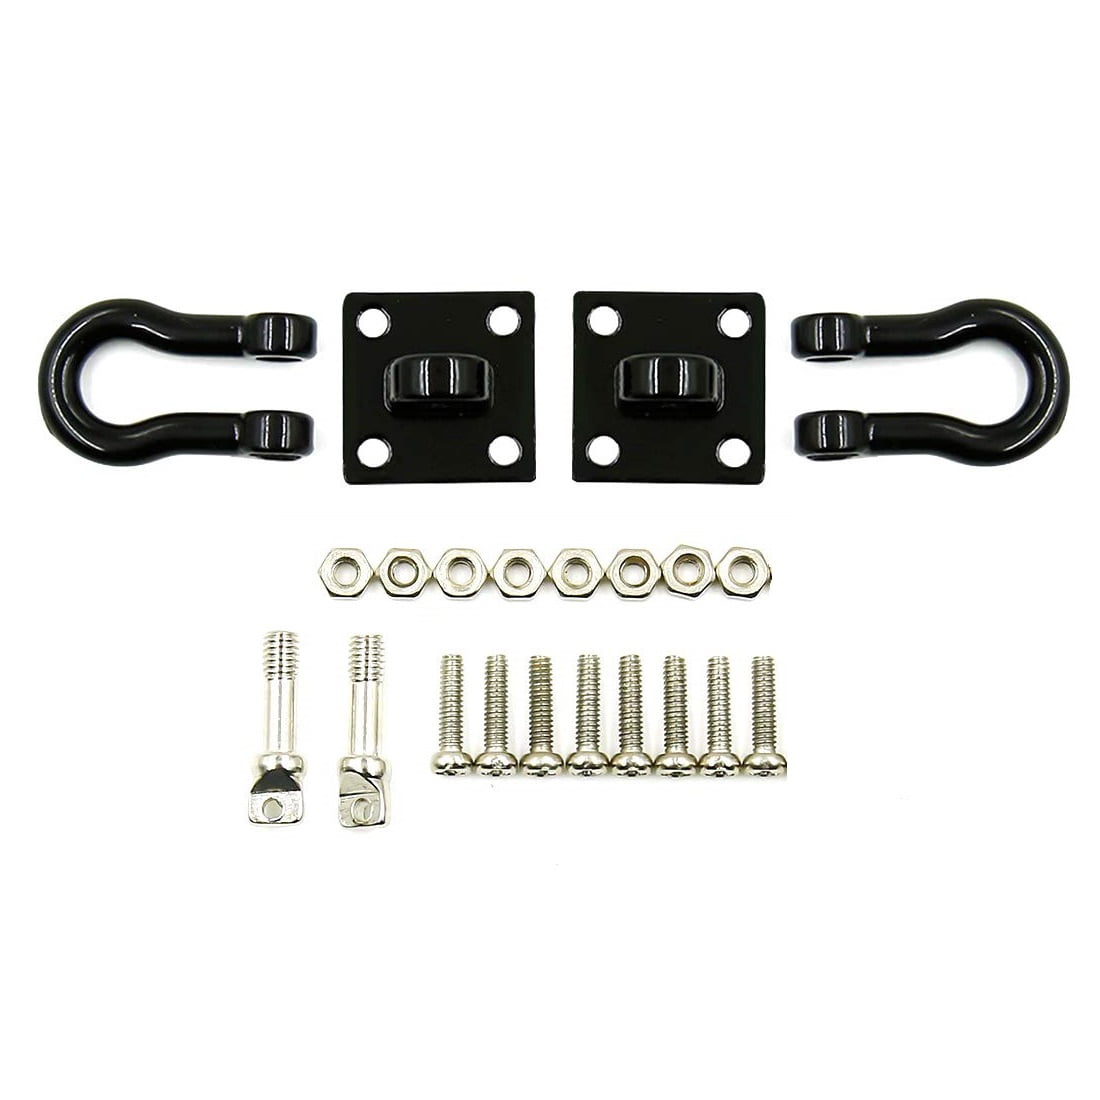 Tow Hook Trailer Chain Durable Shackle for D110 D90 Climbing